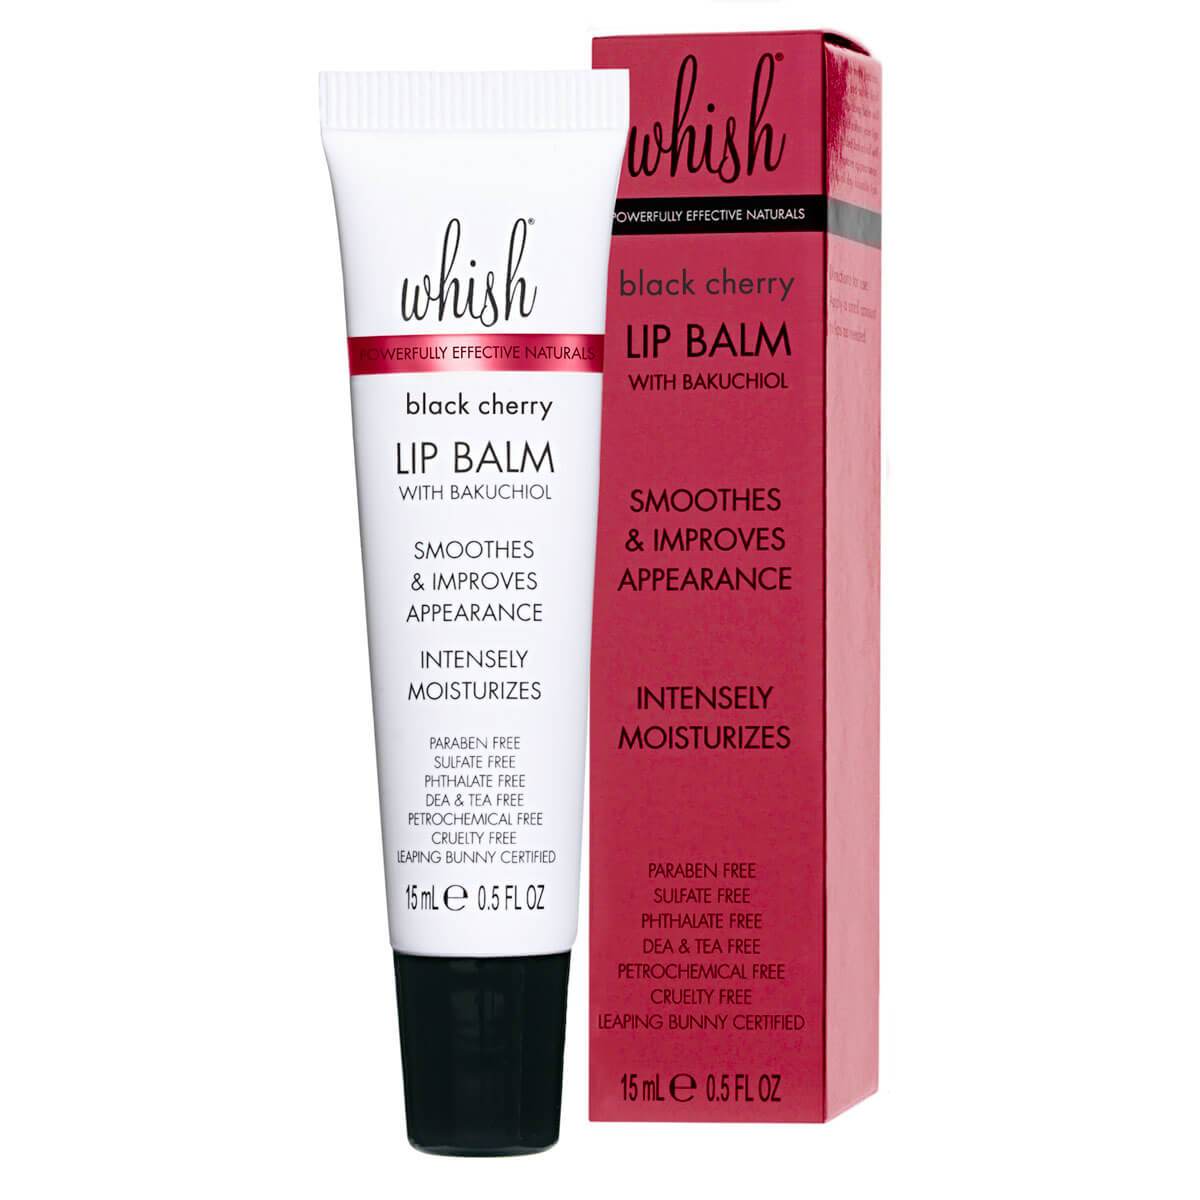 Black Cherry Lip Balm with Bakuchiol - 15ml (receive a full size Whish Shave Cream valued at $38 with purchase!)